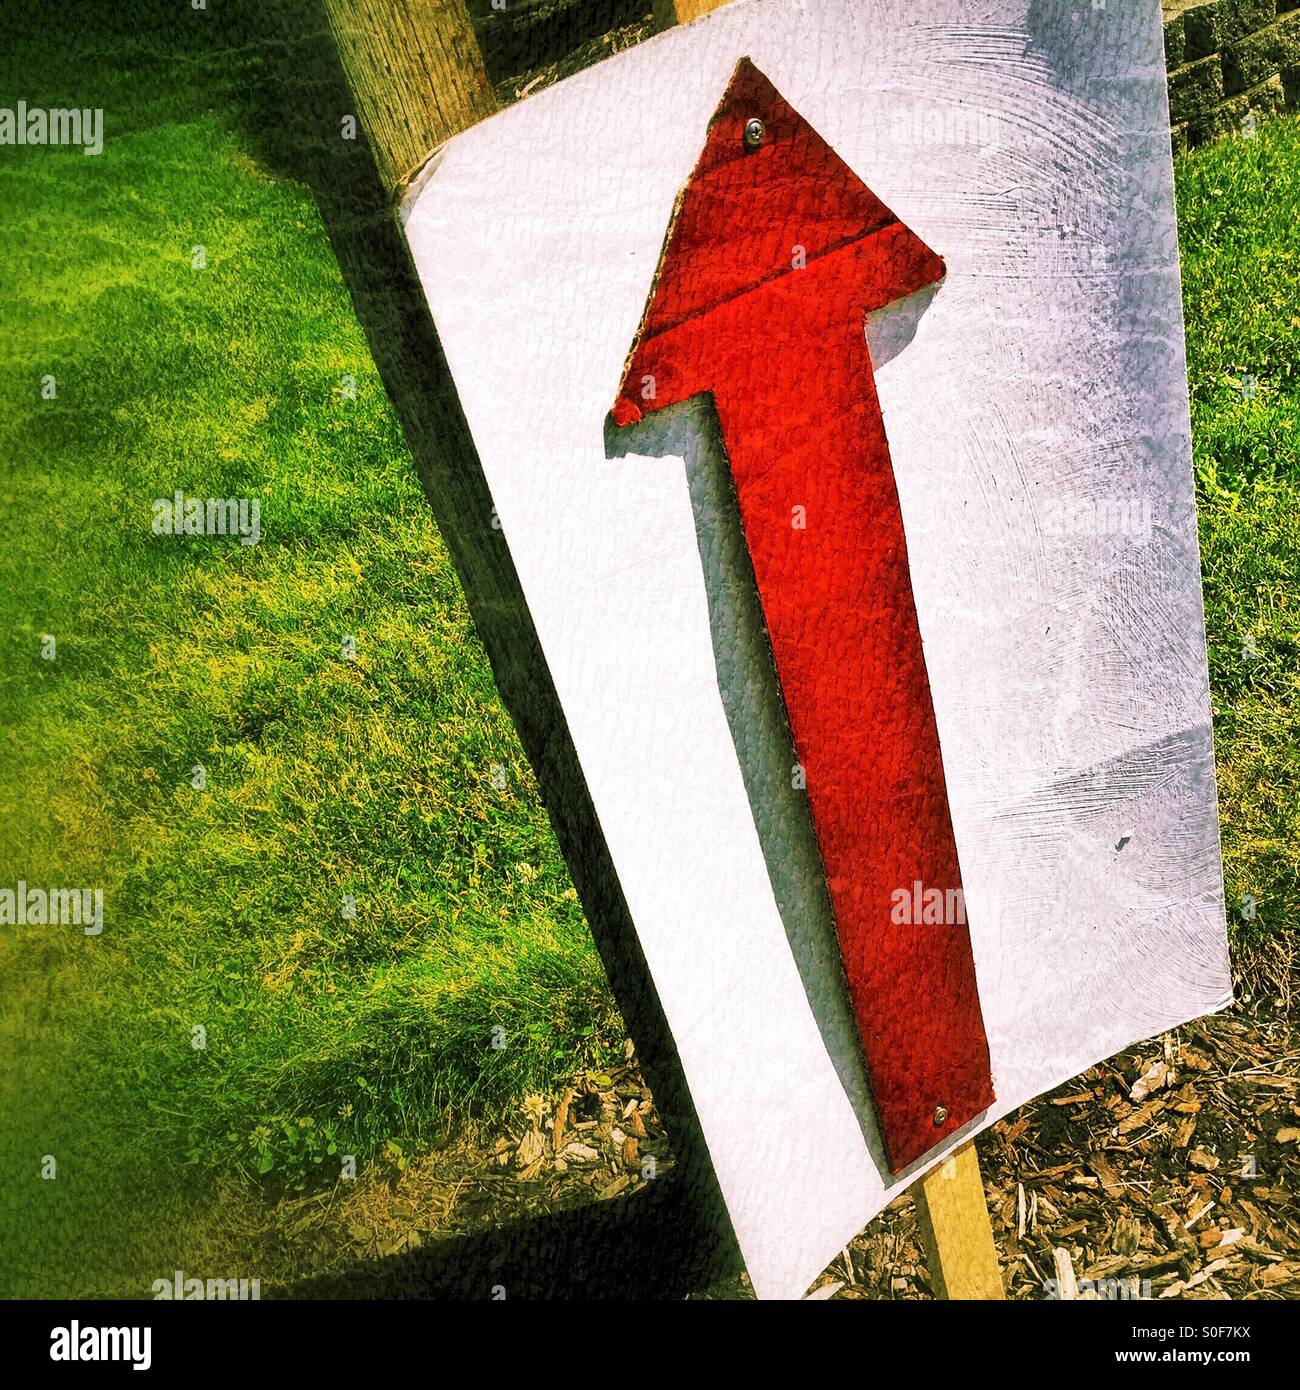 A red arrow on a roadside sign points the way to go. Stock Photo